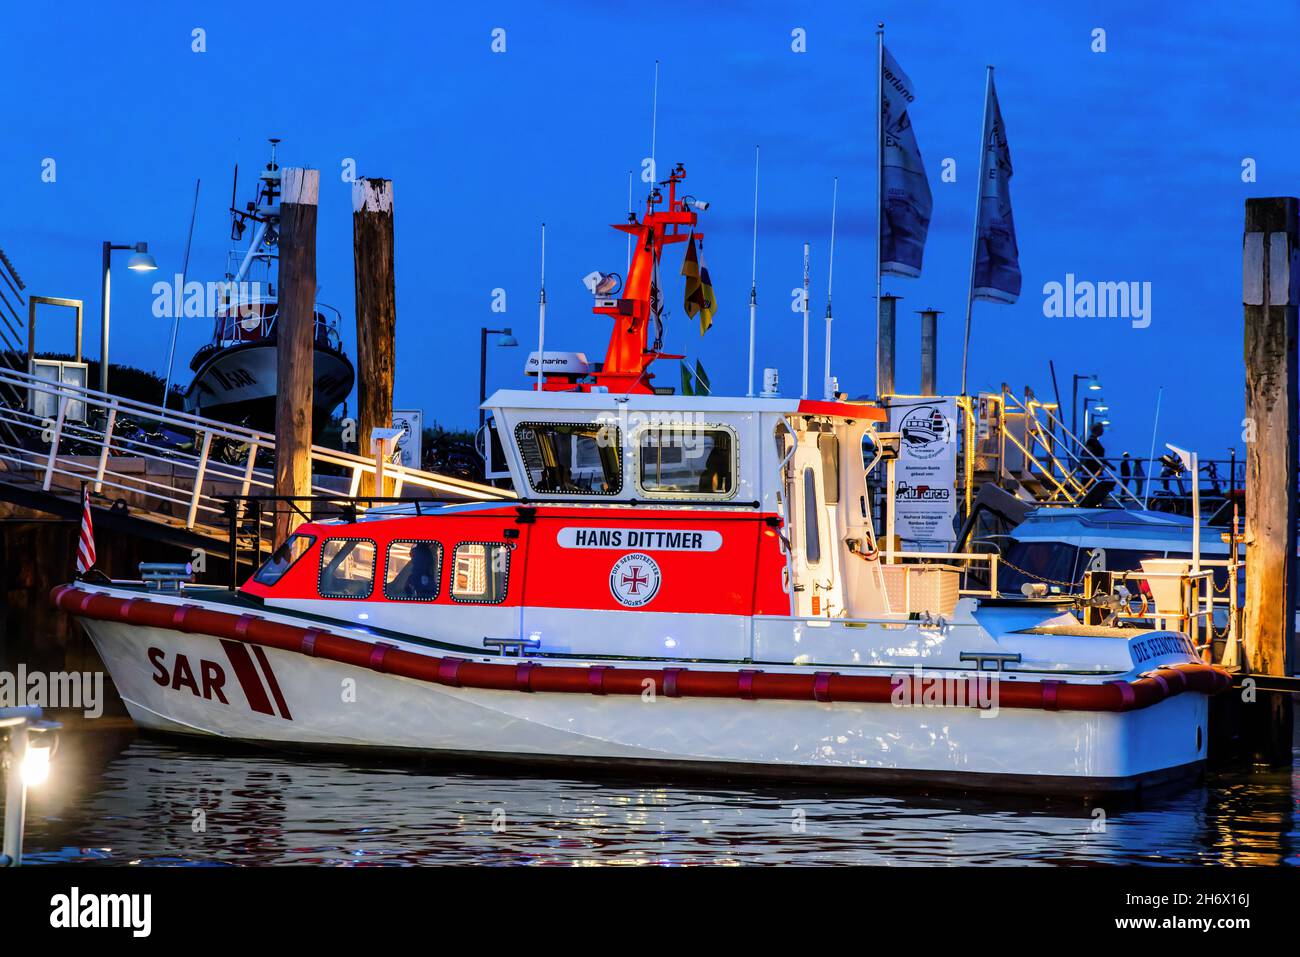 Sea rescue boat Hans Dittmer of the German Sea Rescue Society in the harbor of Juist, East Frisian Islands, Germany. Stock Photo